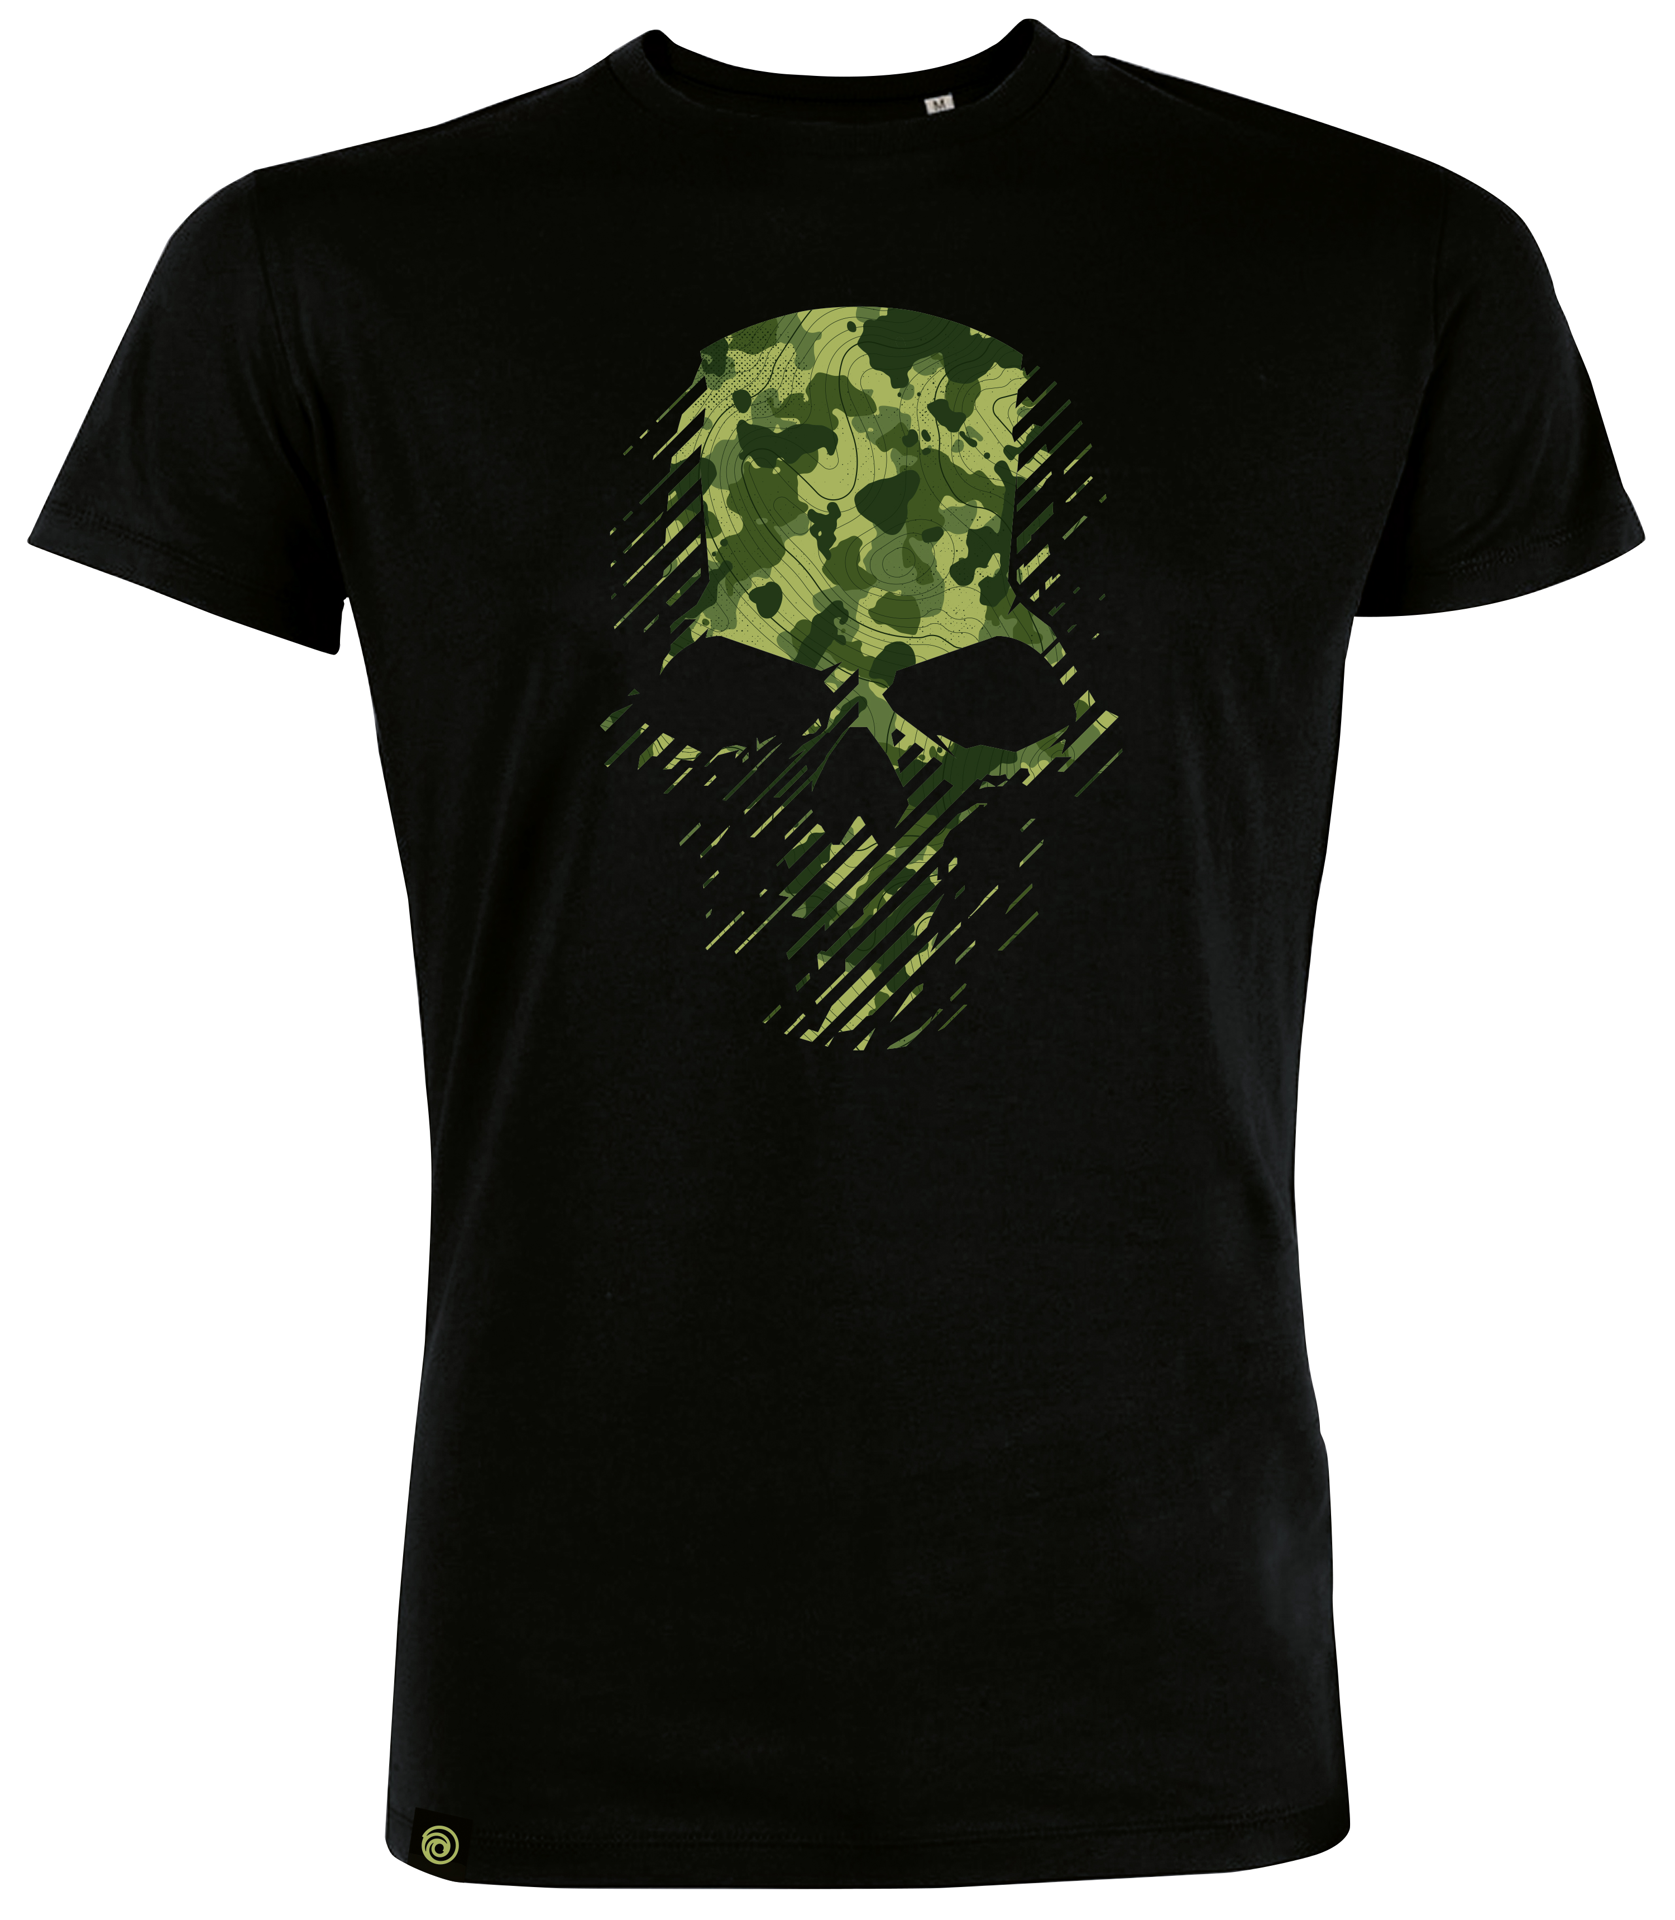 Ghost Recon Breakpoint - Ubisoft Consumer Show 2019 T-Shirt - S